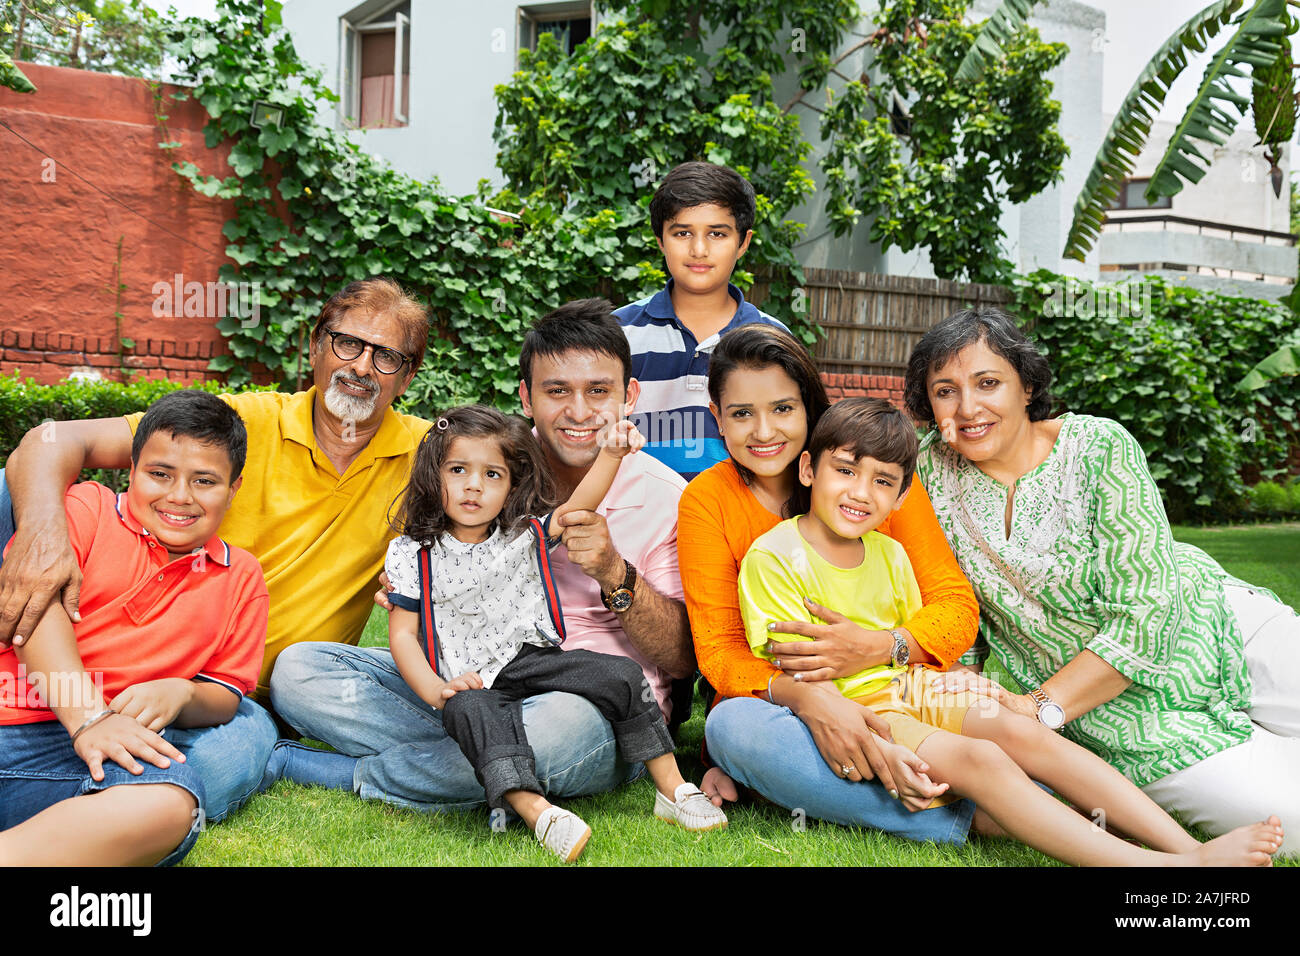 Group of Indian family Grandparents, Parents and Children Sitting-on-grass relaxing Together in front of their home in the garden Stock Photo